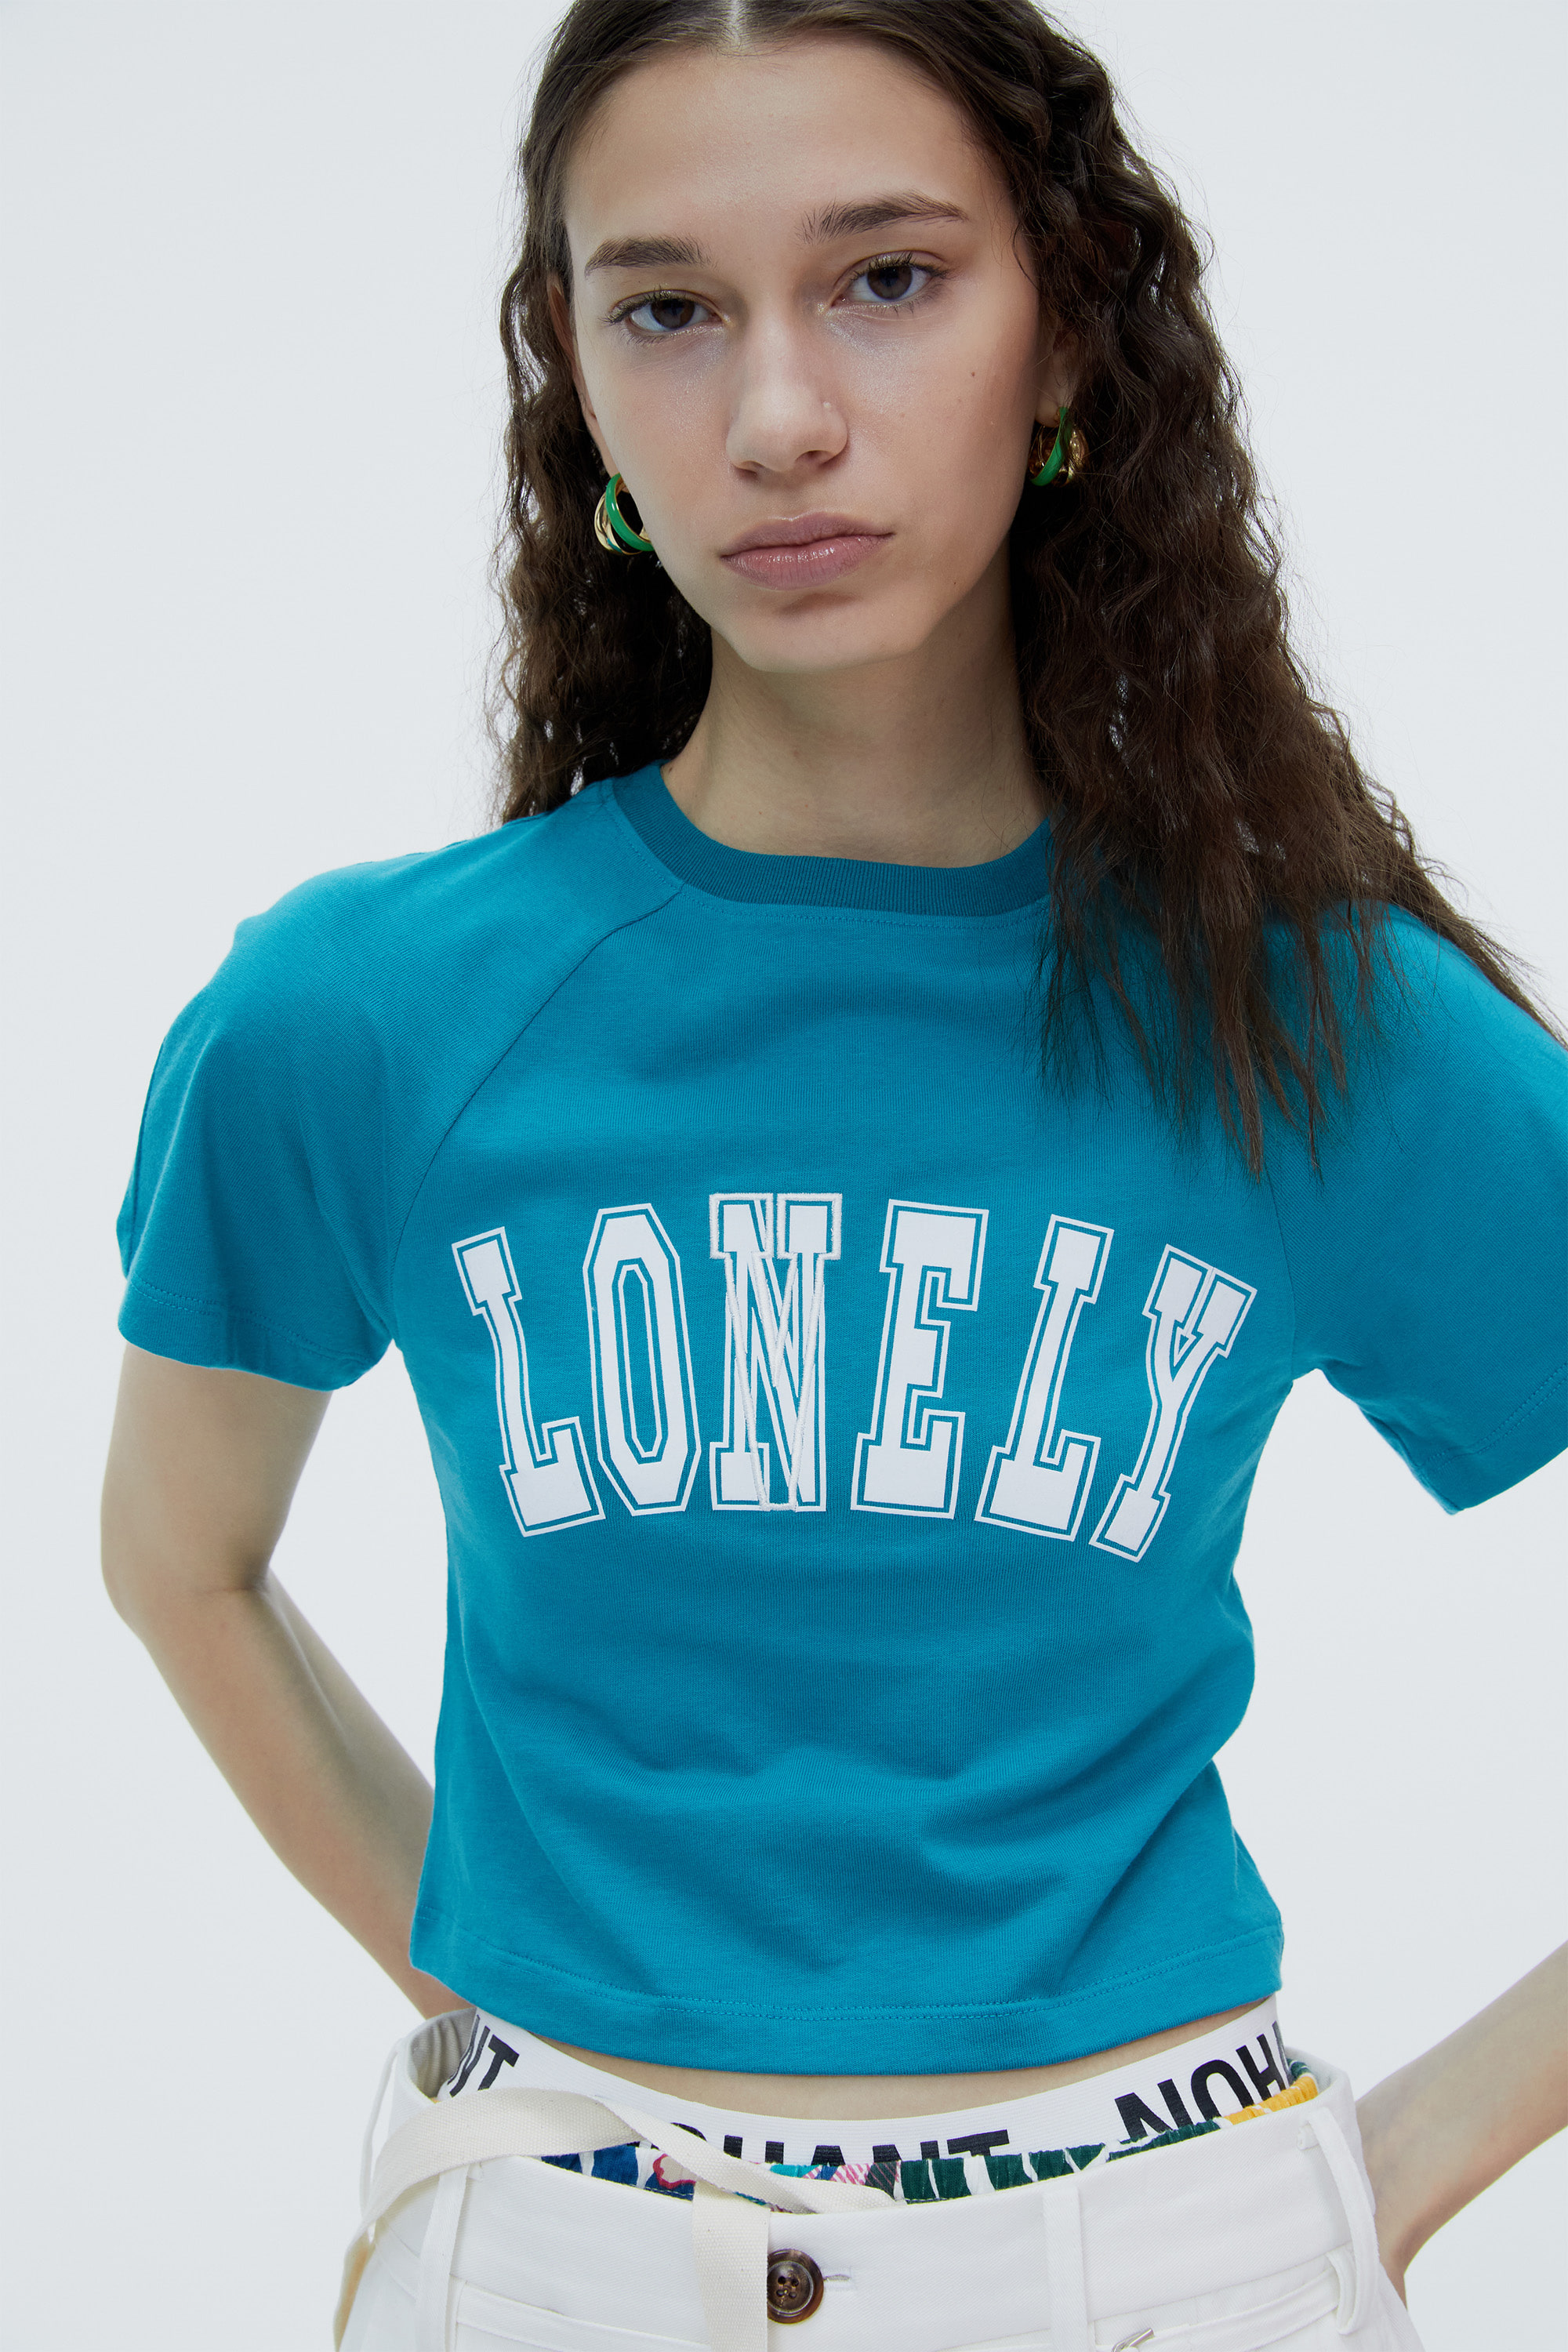 LONELY/LOVELY BABY T SHIRT